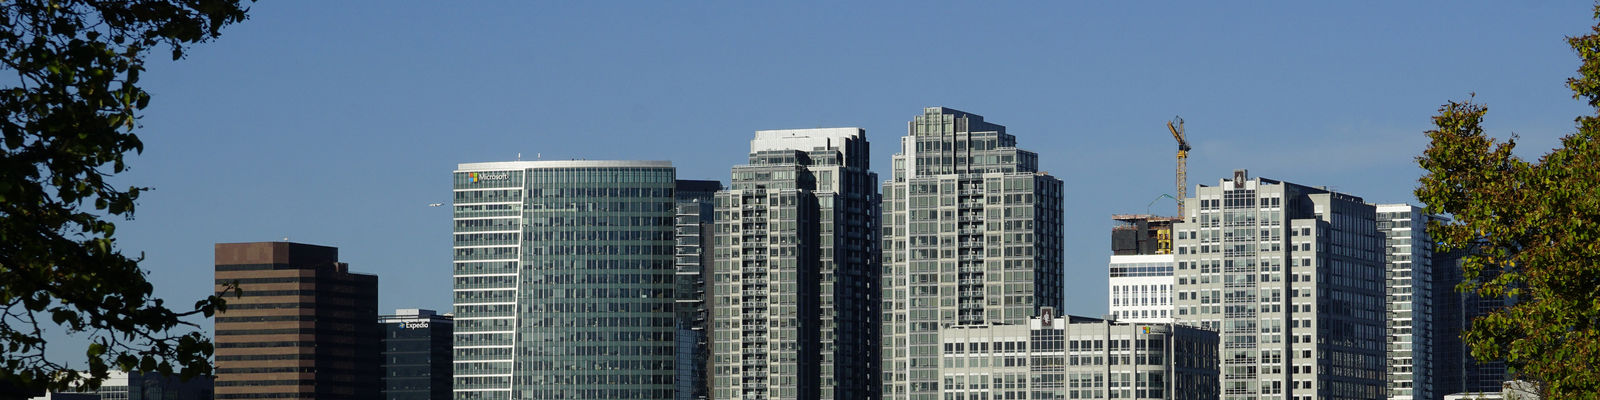 Downtown buildings from an eastern view